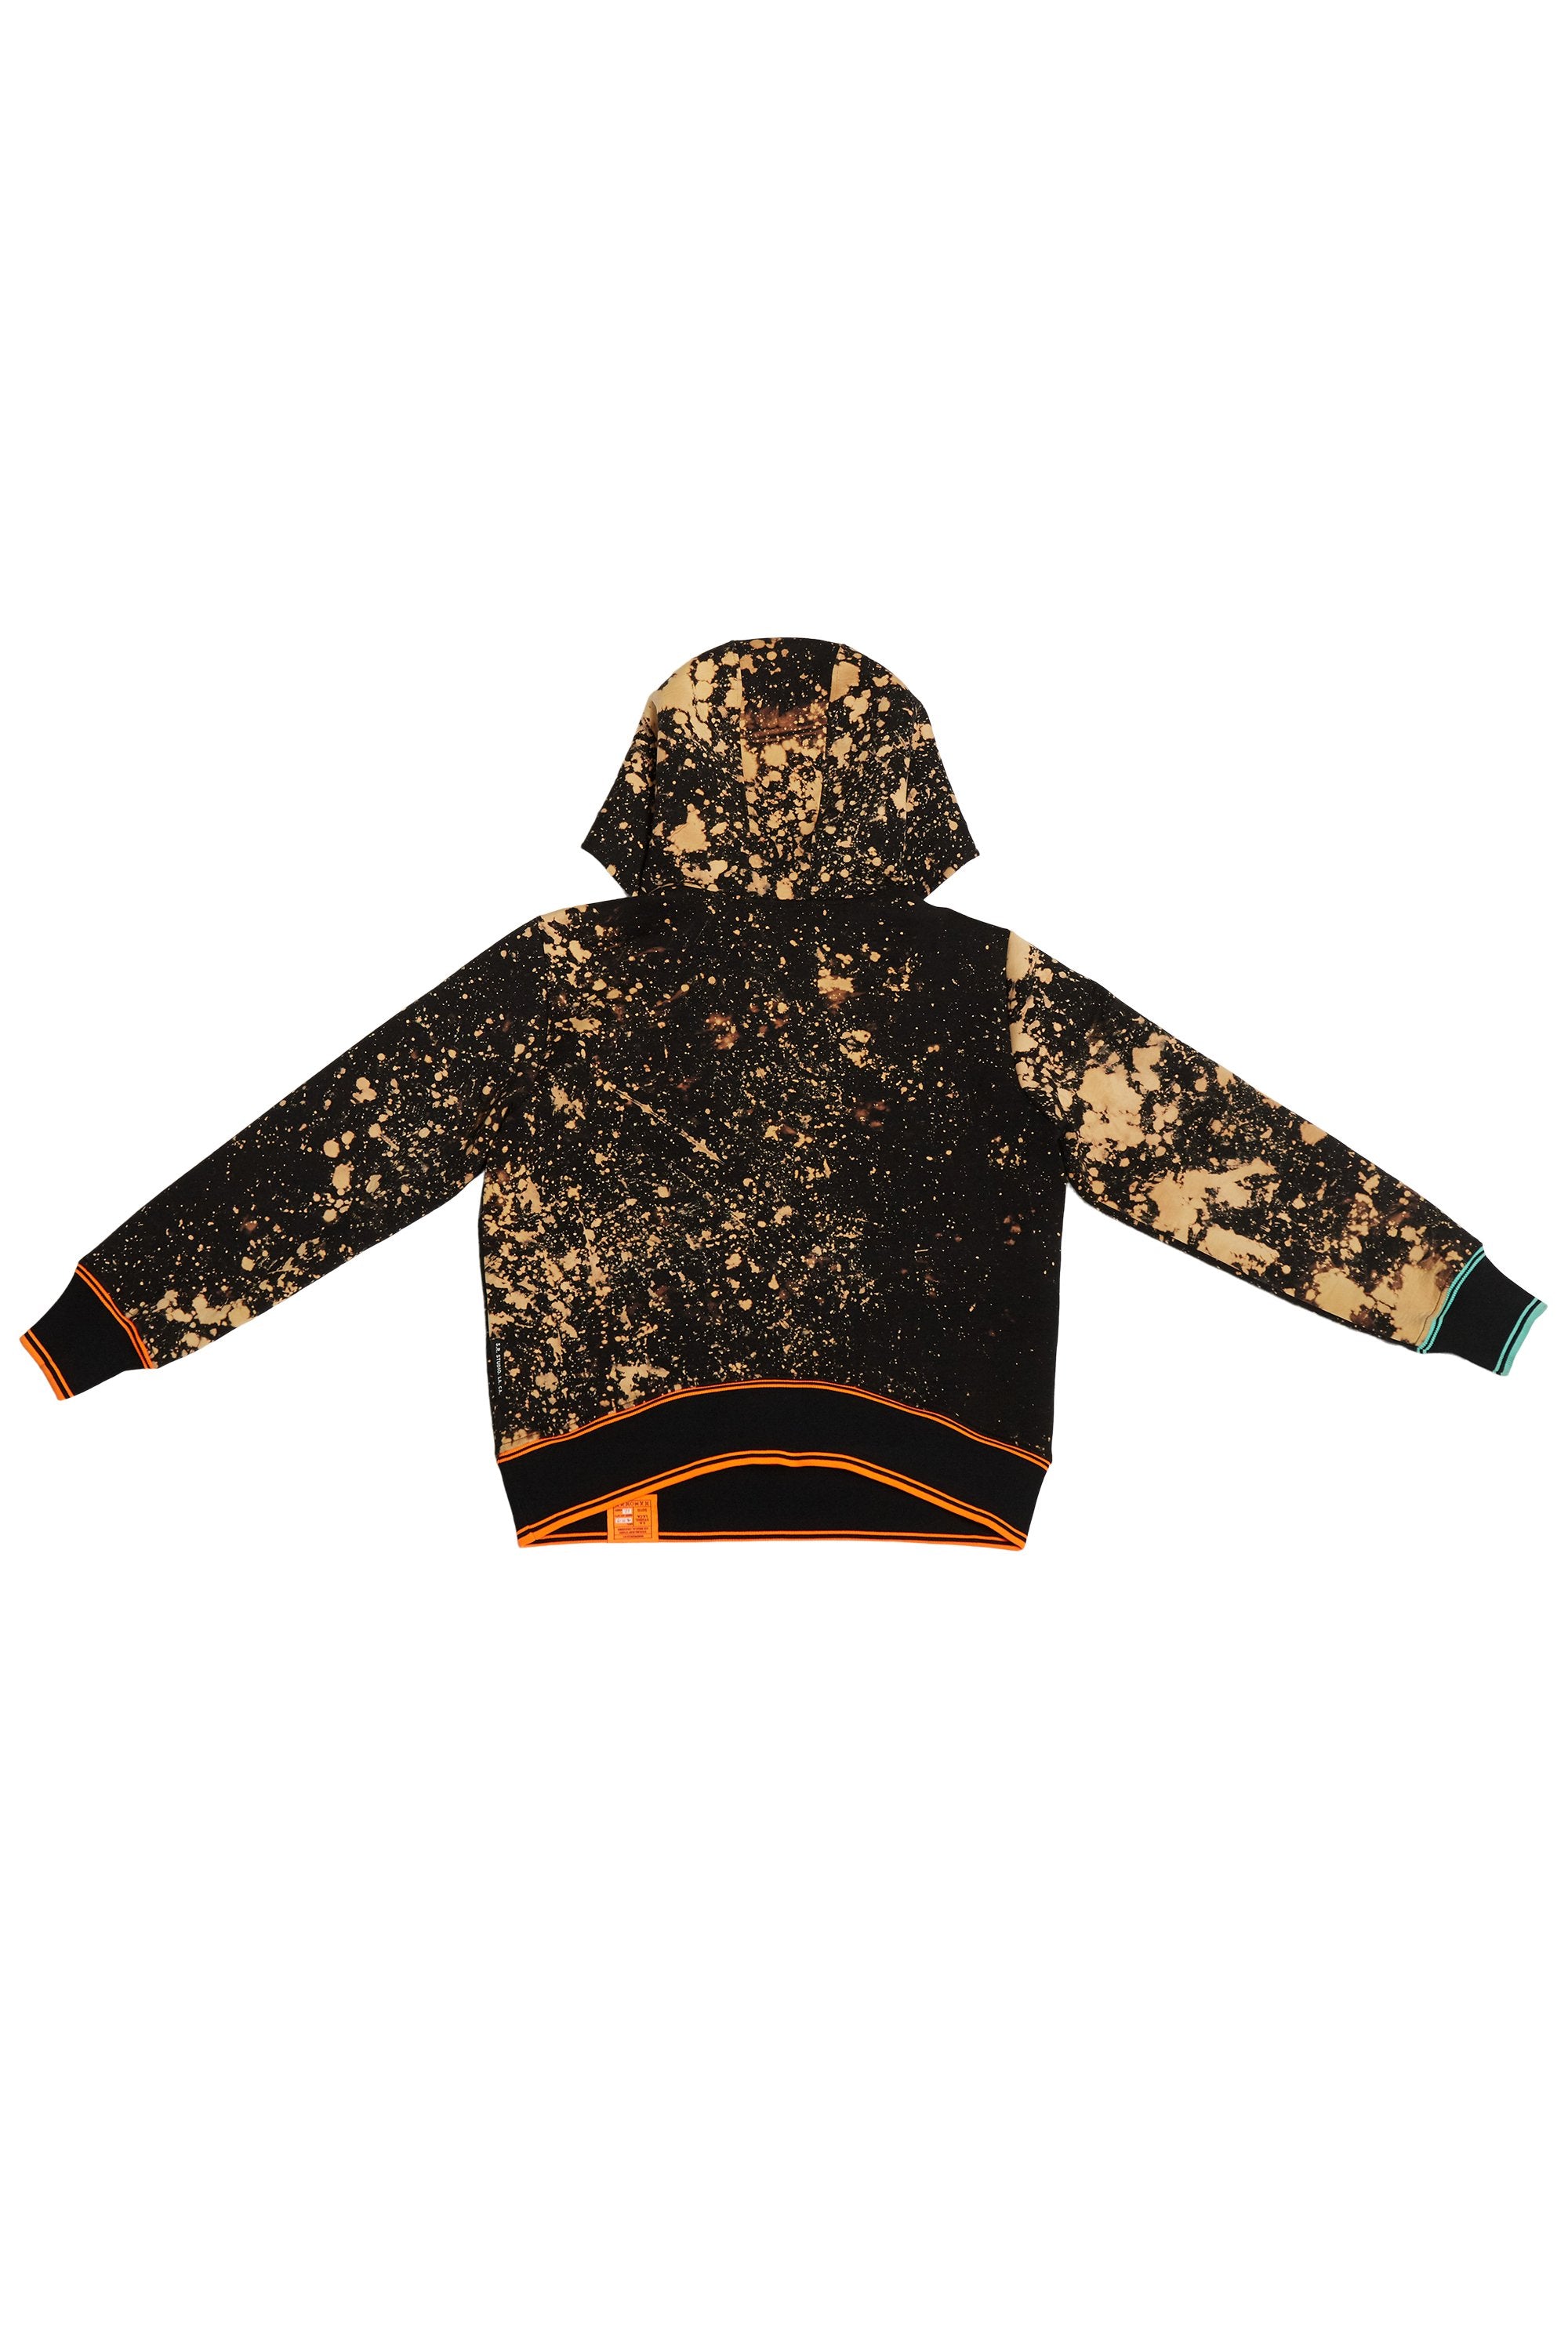 HAND-BLEACHED SOTO SLANTED PULLOVER HOODIE WITH MULTI RIB – S.R.